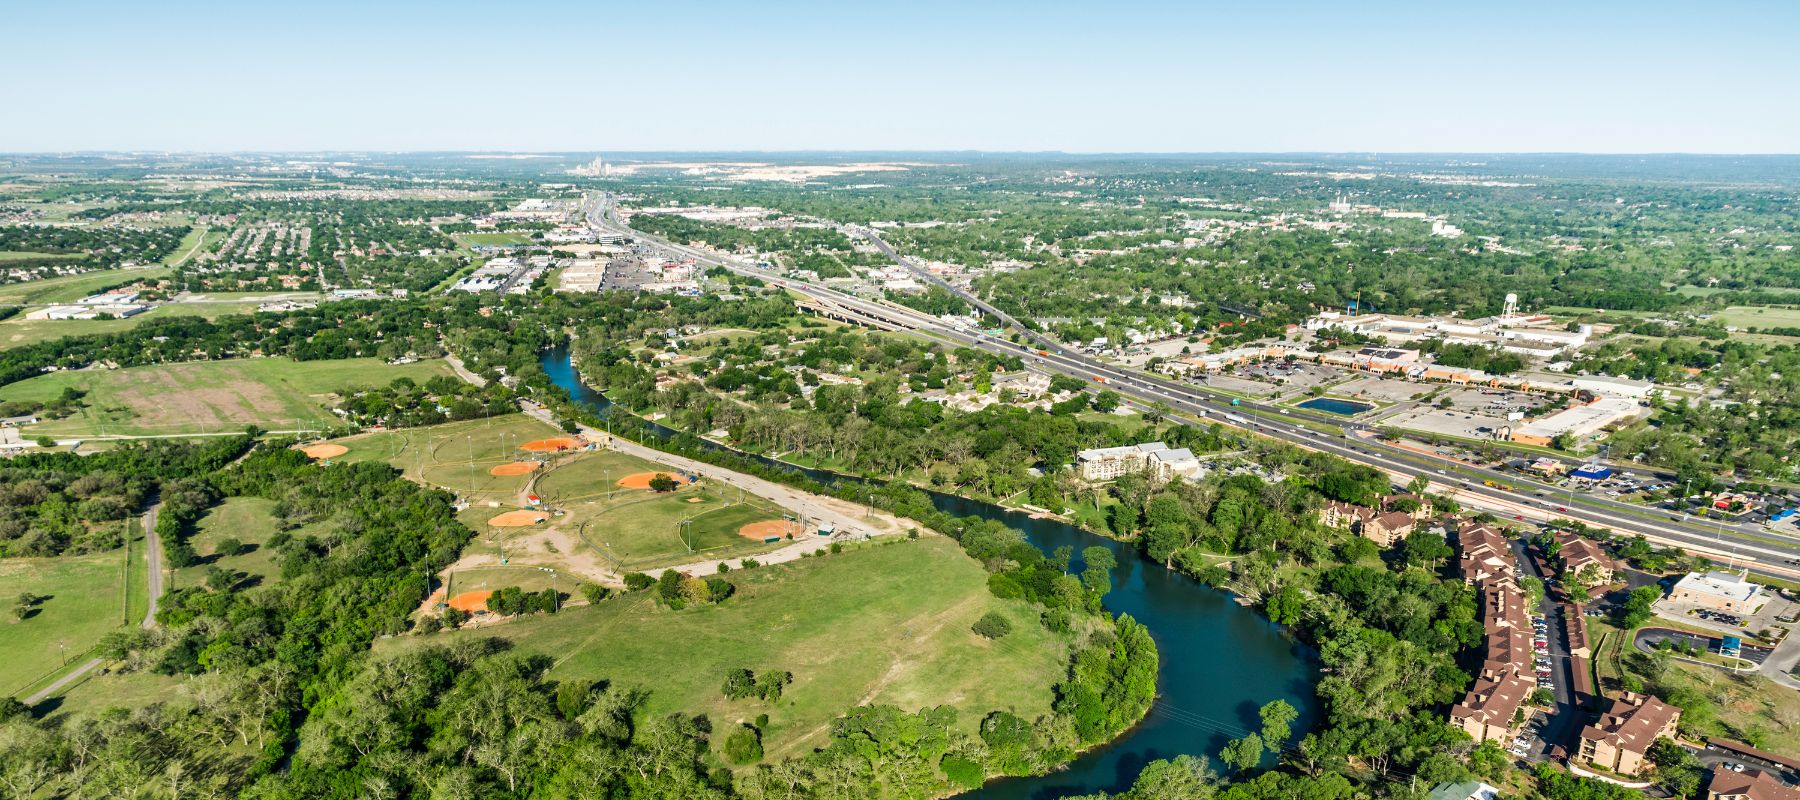 aerial overview of new braunfels with parts of the city and the river showing